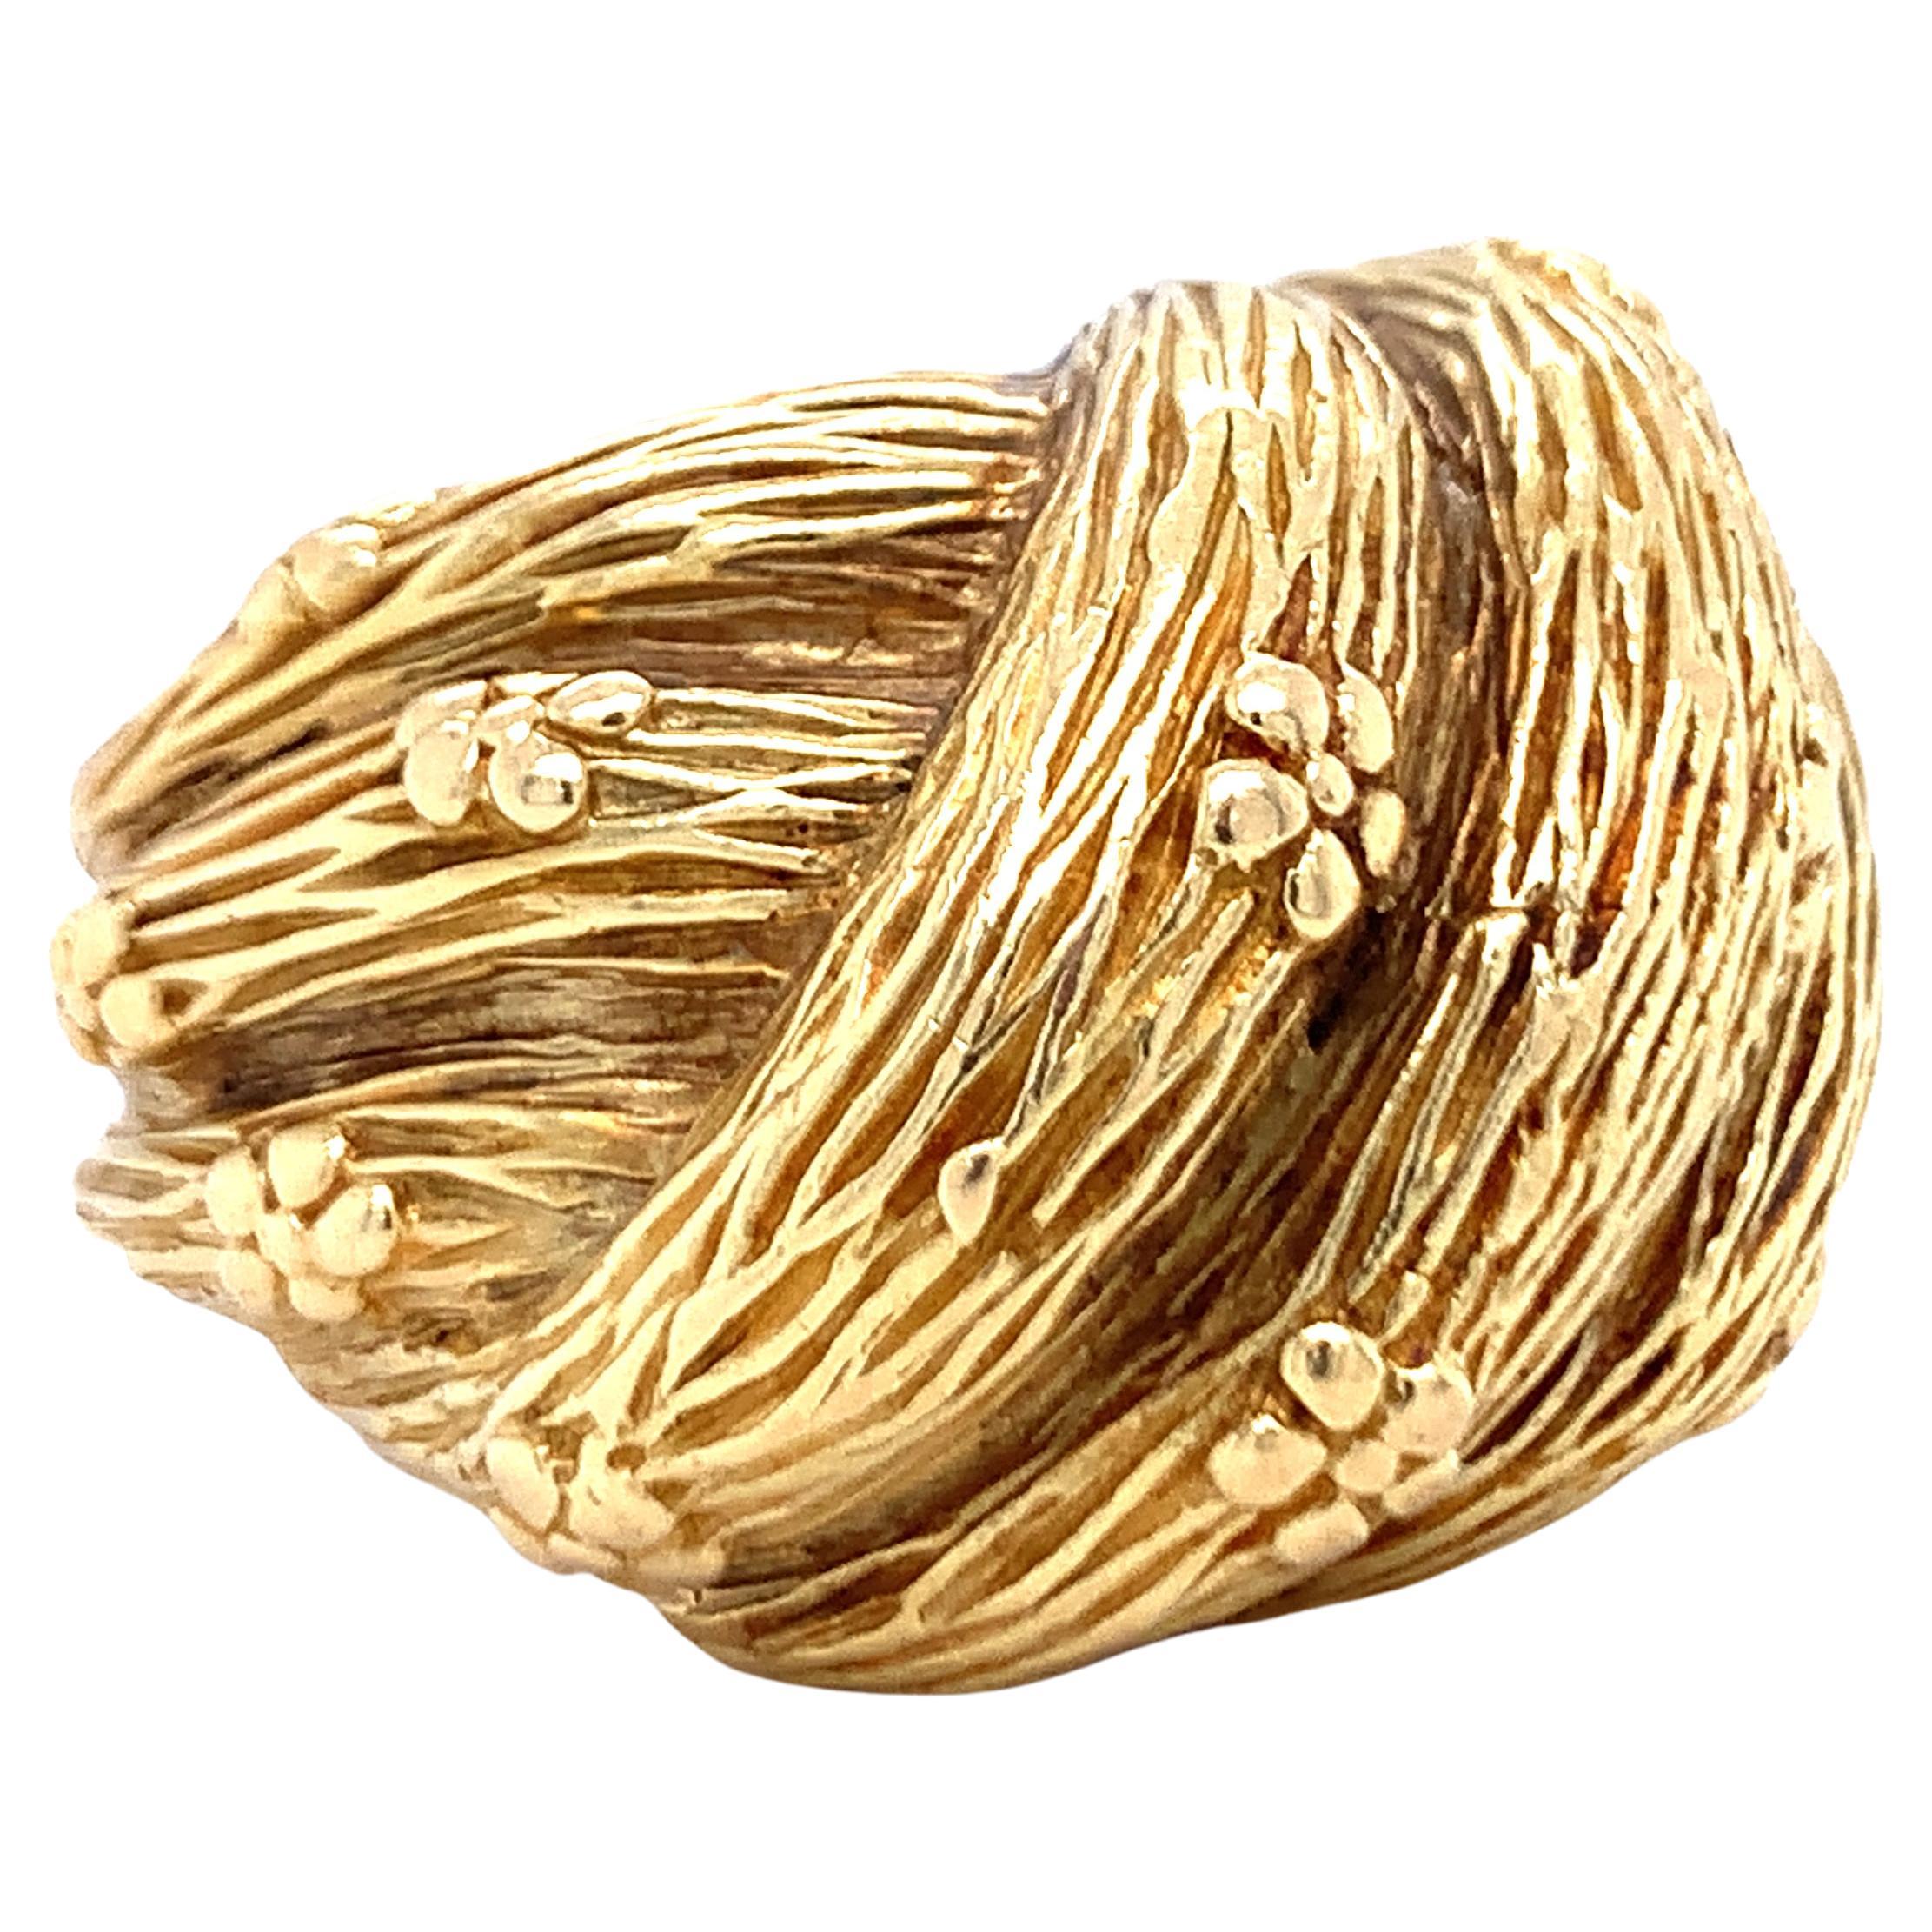 Textured Golden Knot Ring by Hammerman Brothers